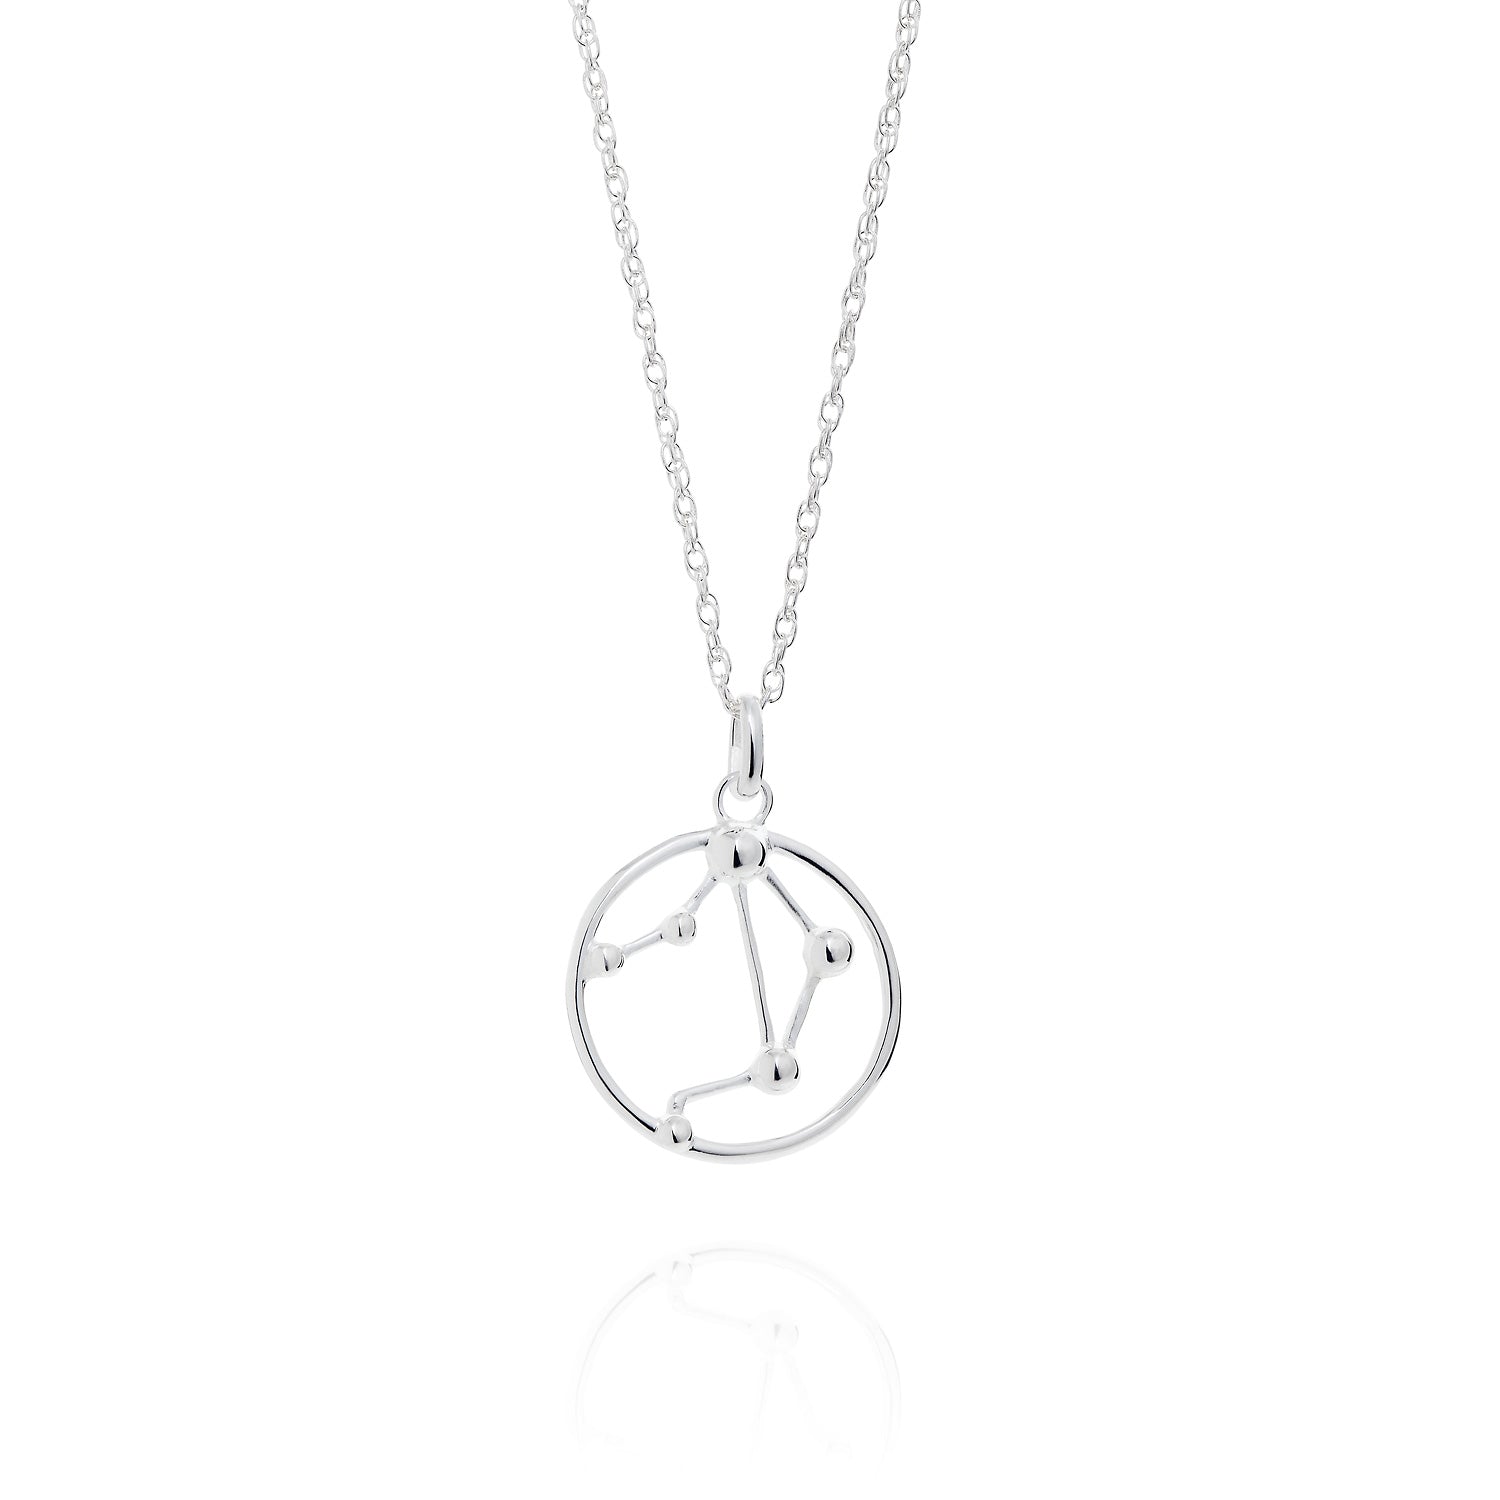 Star Sign Silver Necklace by Yasmin Everley